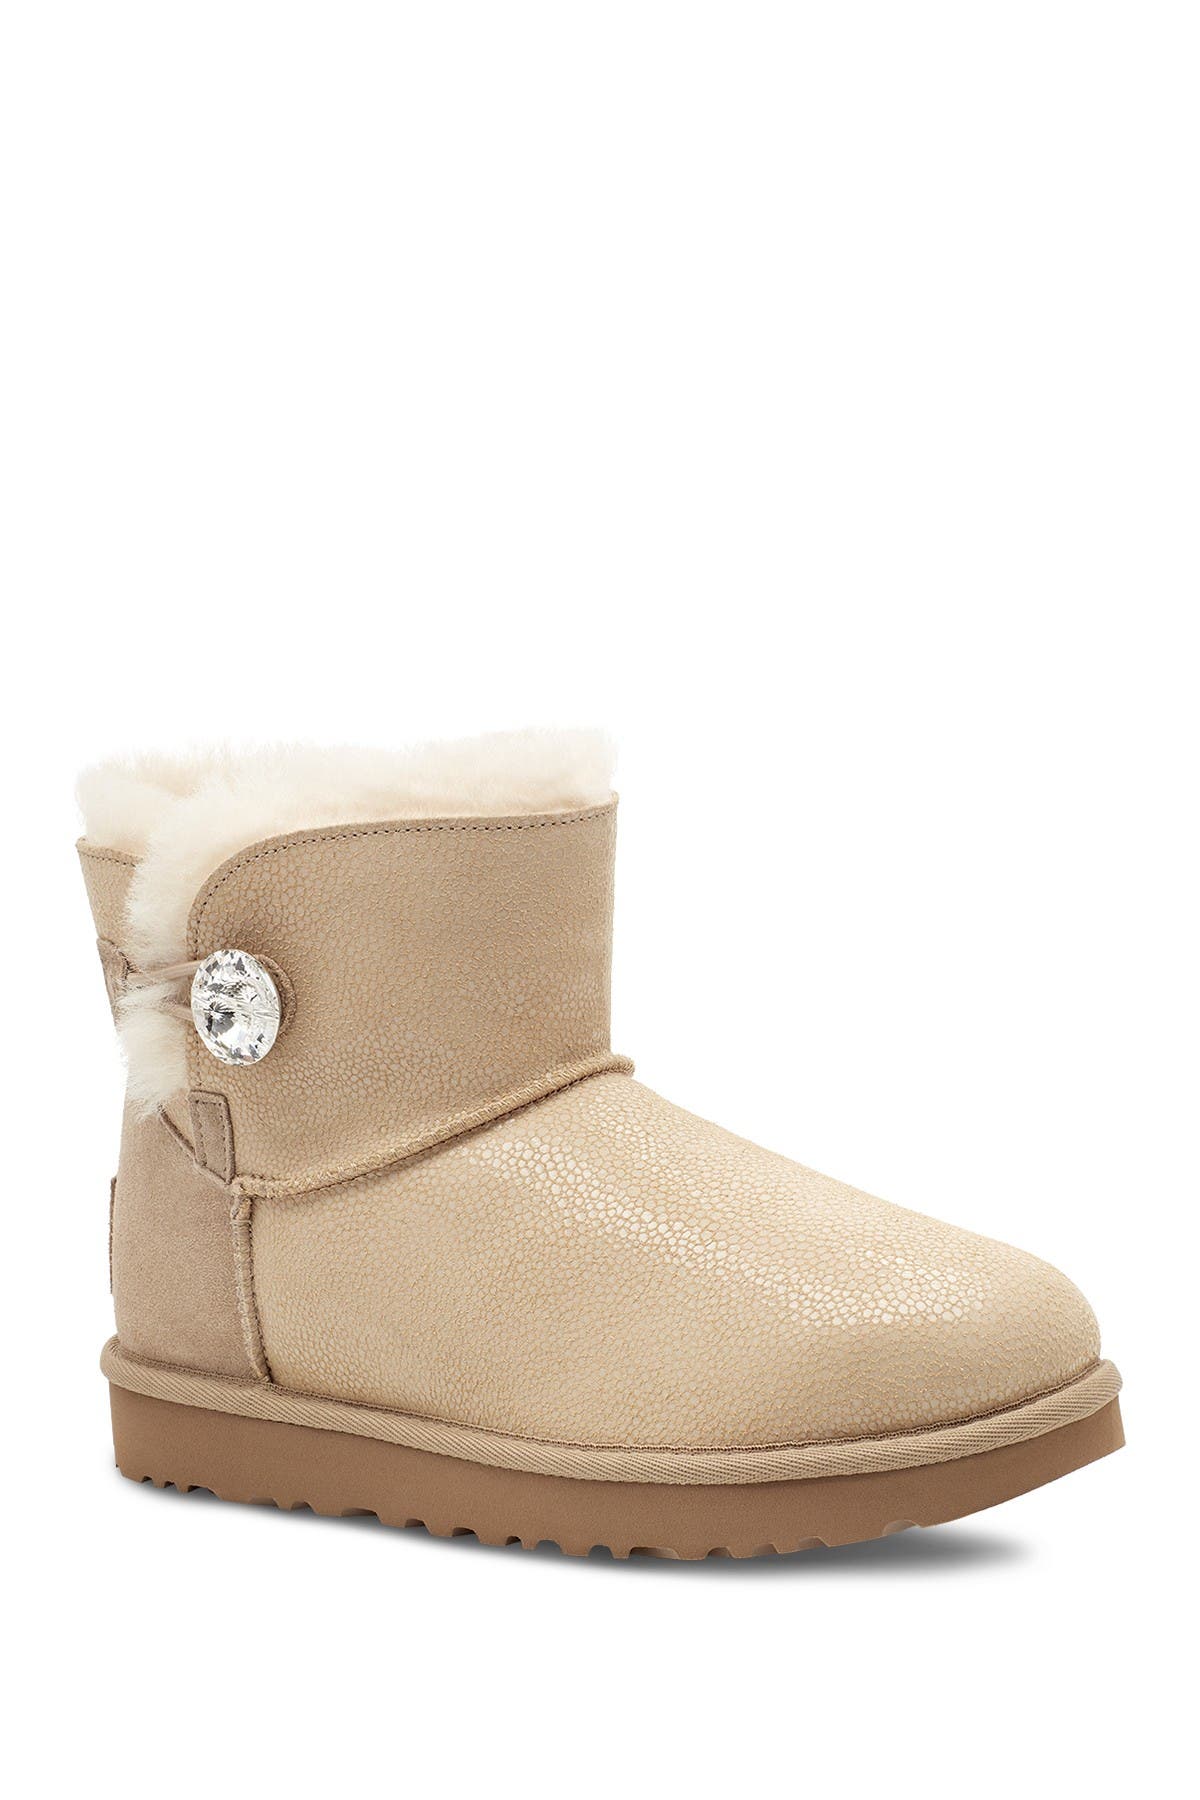 uggs with bling